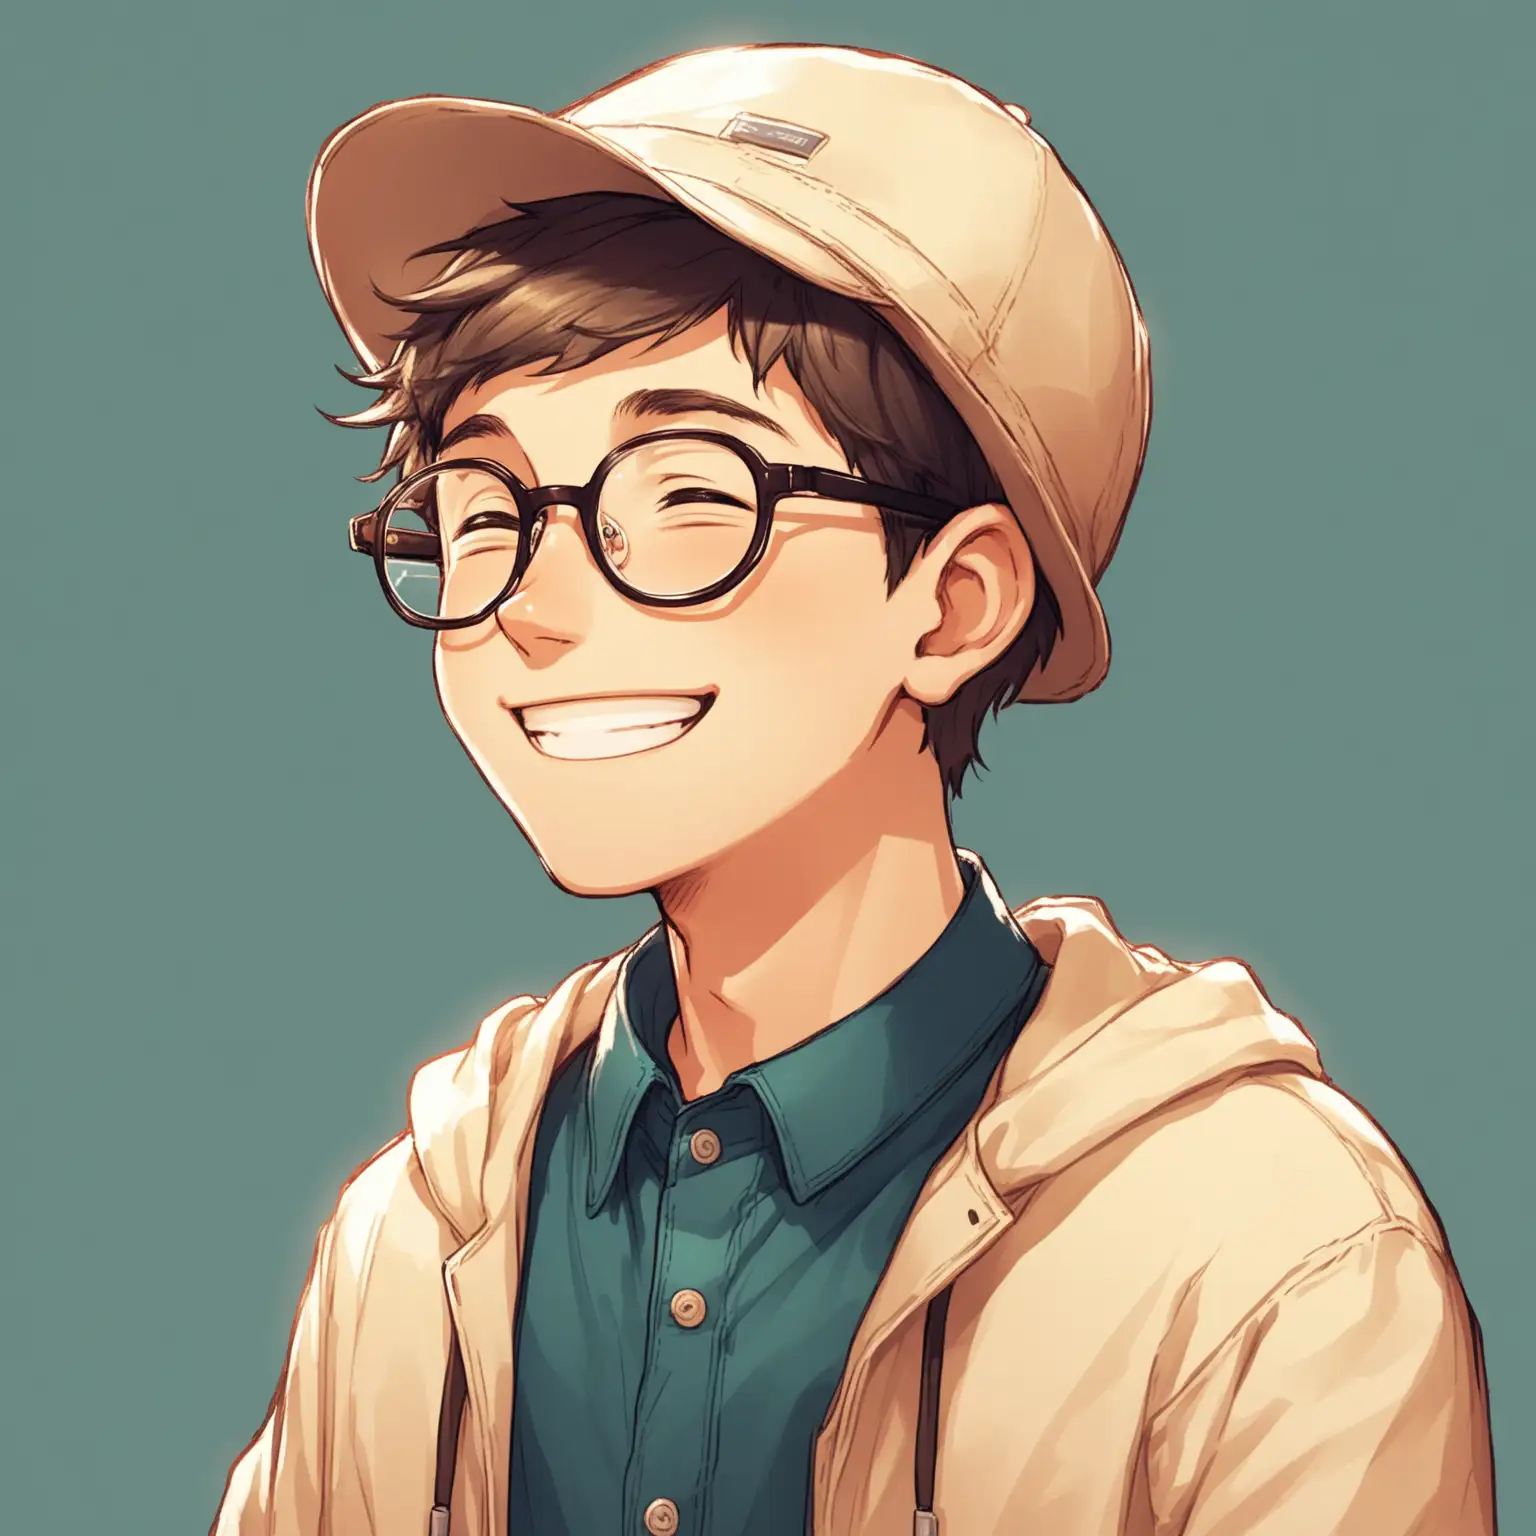 a boy, wearing glasses, cheerful disposition, smiling, wearing a hat, feeling like a programmer, profile